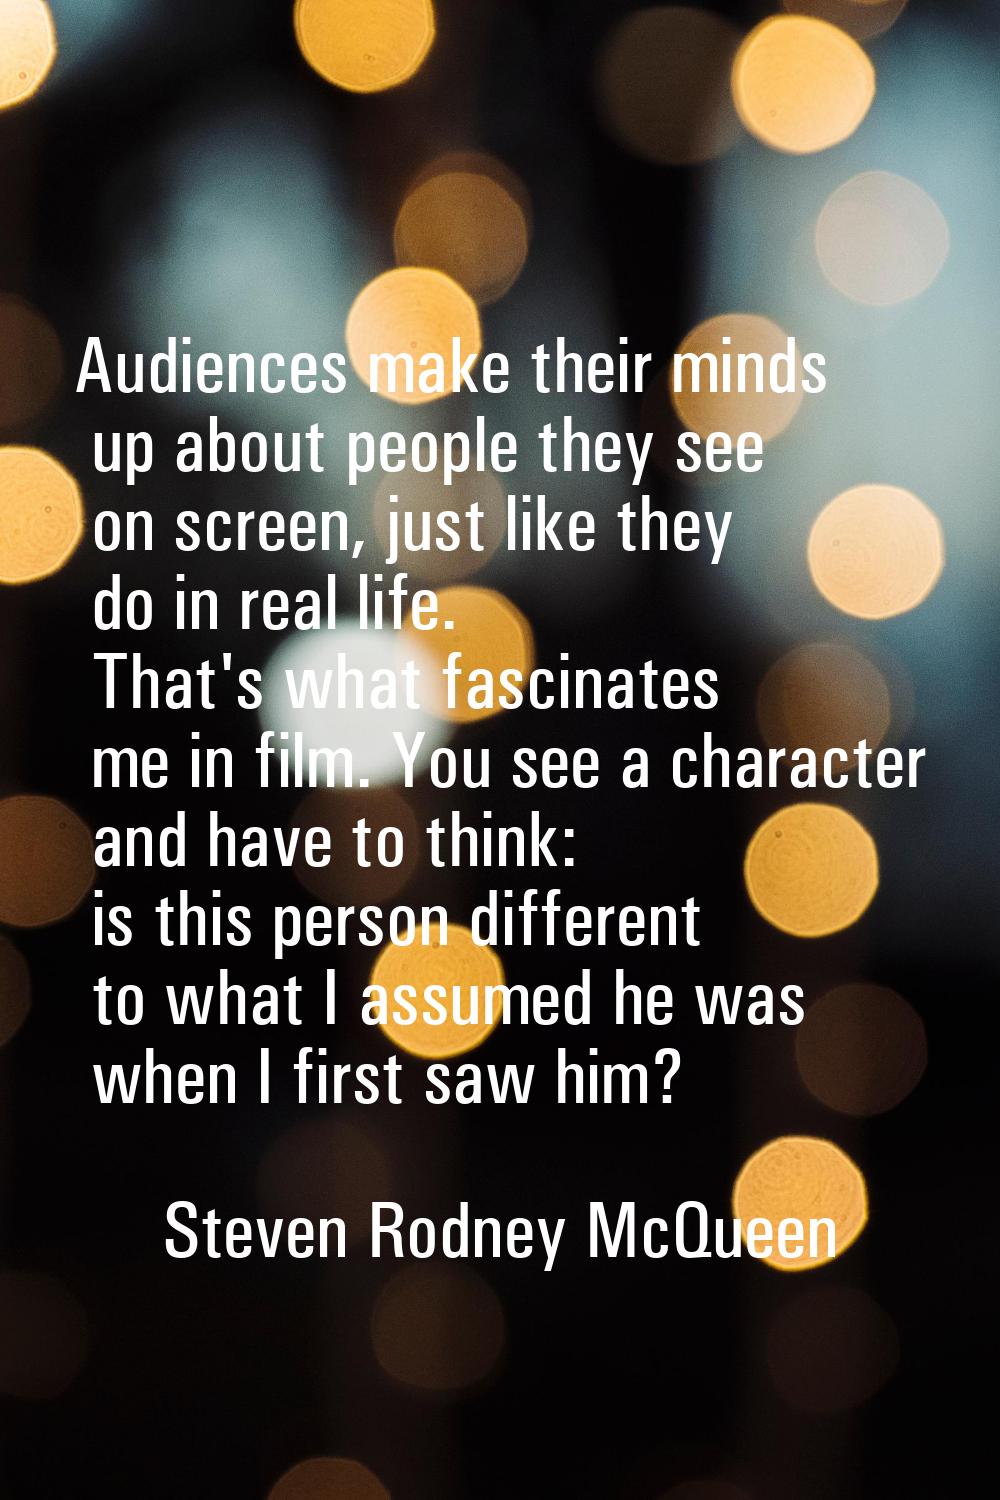 Audiences make their minds up about people they see on screen, just like they do in real life. That